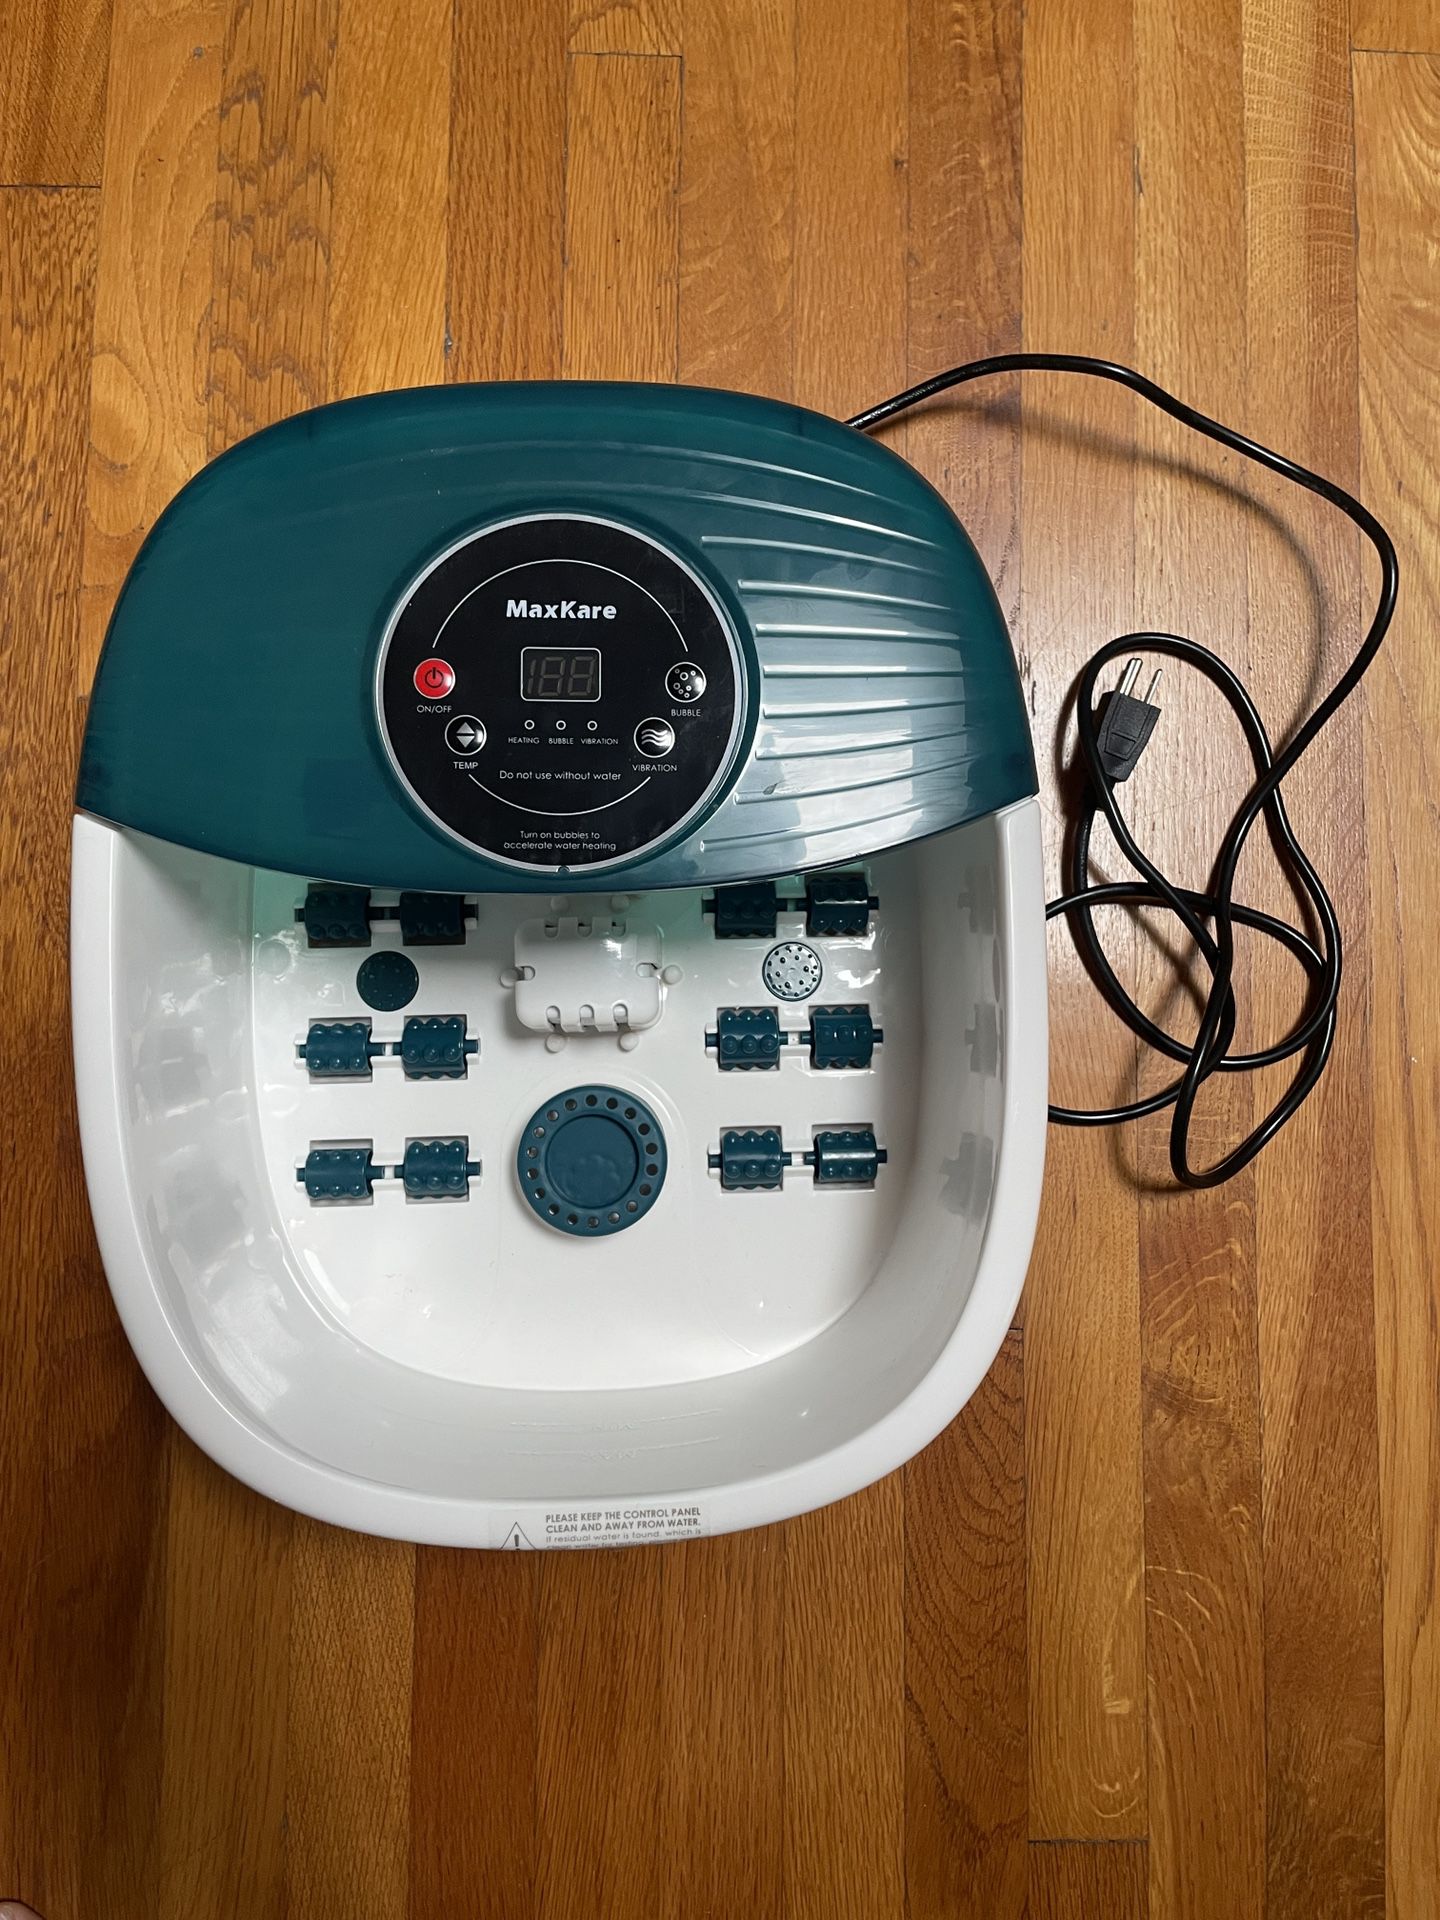 MaxKare Foot Spa Bath Massager with Heat, Bubbles, and Vibration, Digital  Temperature Control, 16 Masssage Rollers with Mini Detachable Massage  Points for Sale in Long Beach, CA - OfferUp